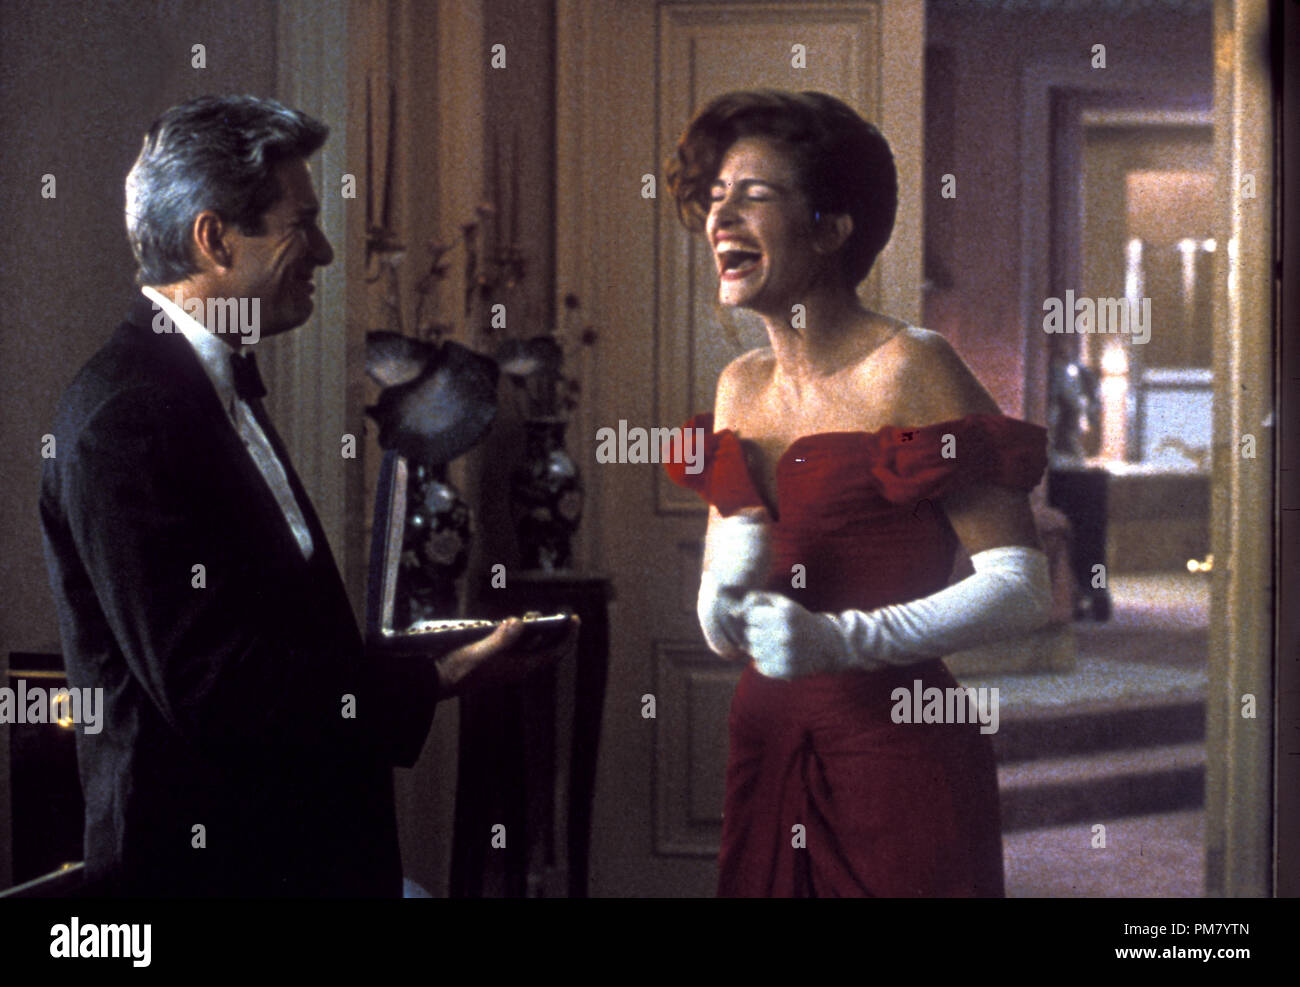 Film still or Publicity still from 'Pretty Woman' Richard Gere and Julia Roberts © 1990 Touchstone All Rights Reserved   File Reference # 31571125THA  For Editorial Use Only Stock Photo